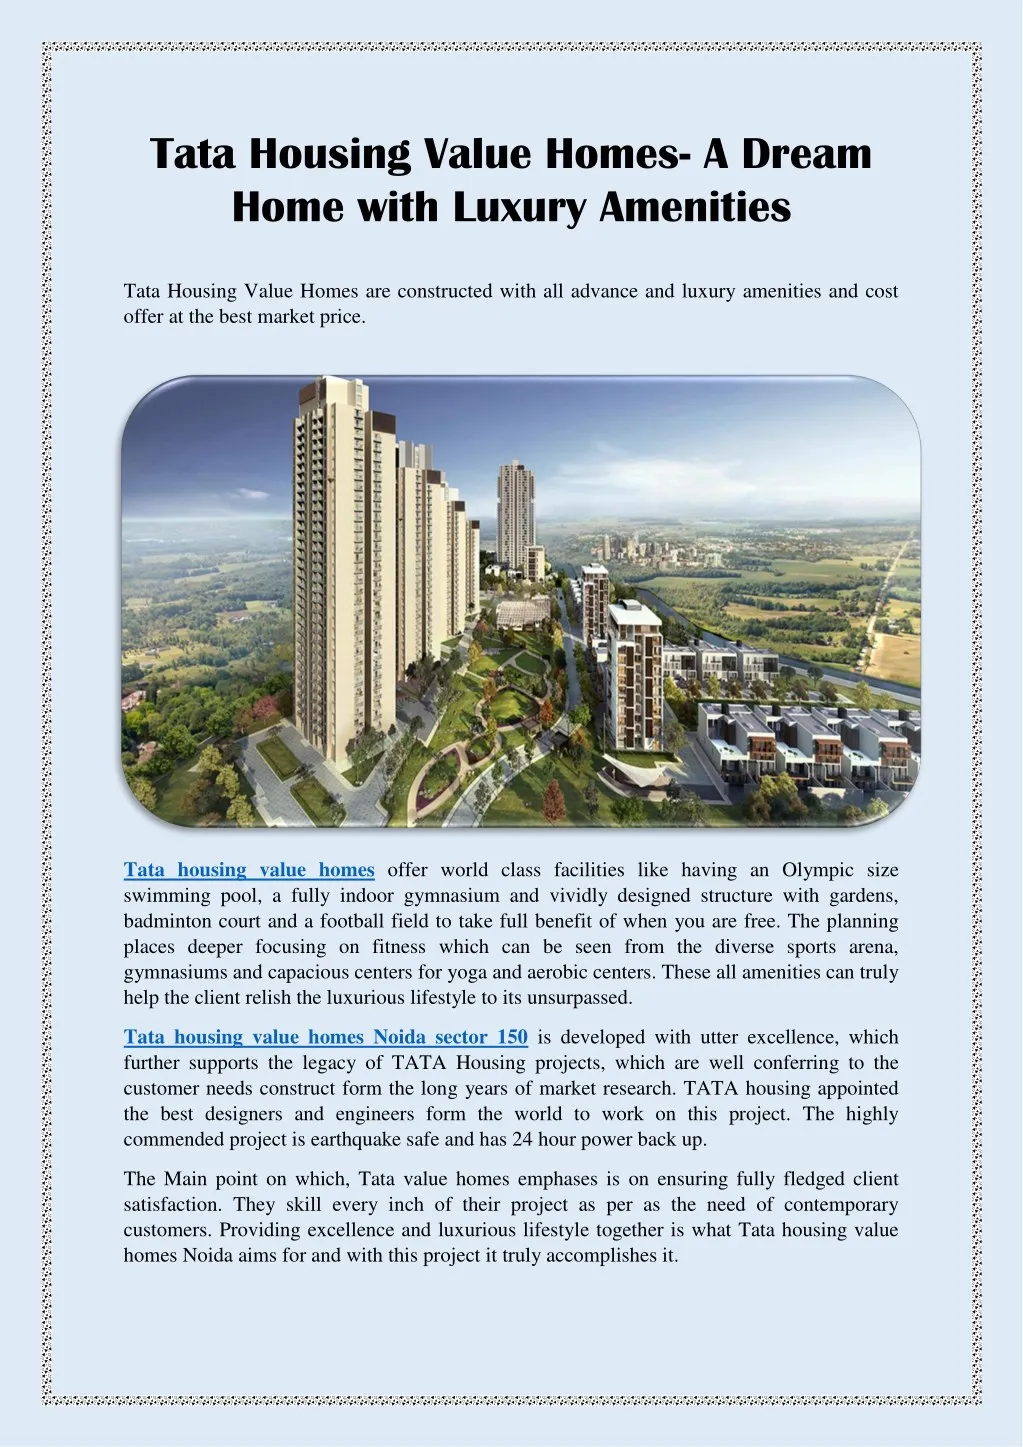 tata housing value homes a dream home with luxury